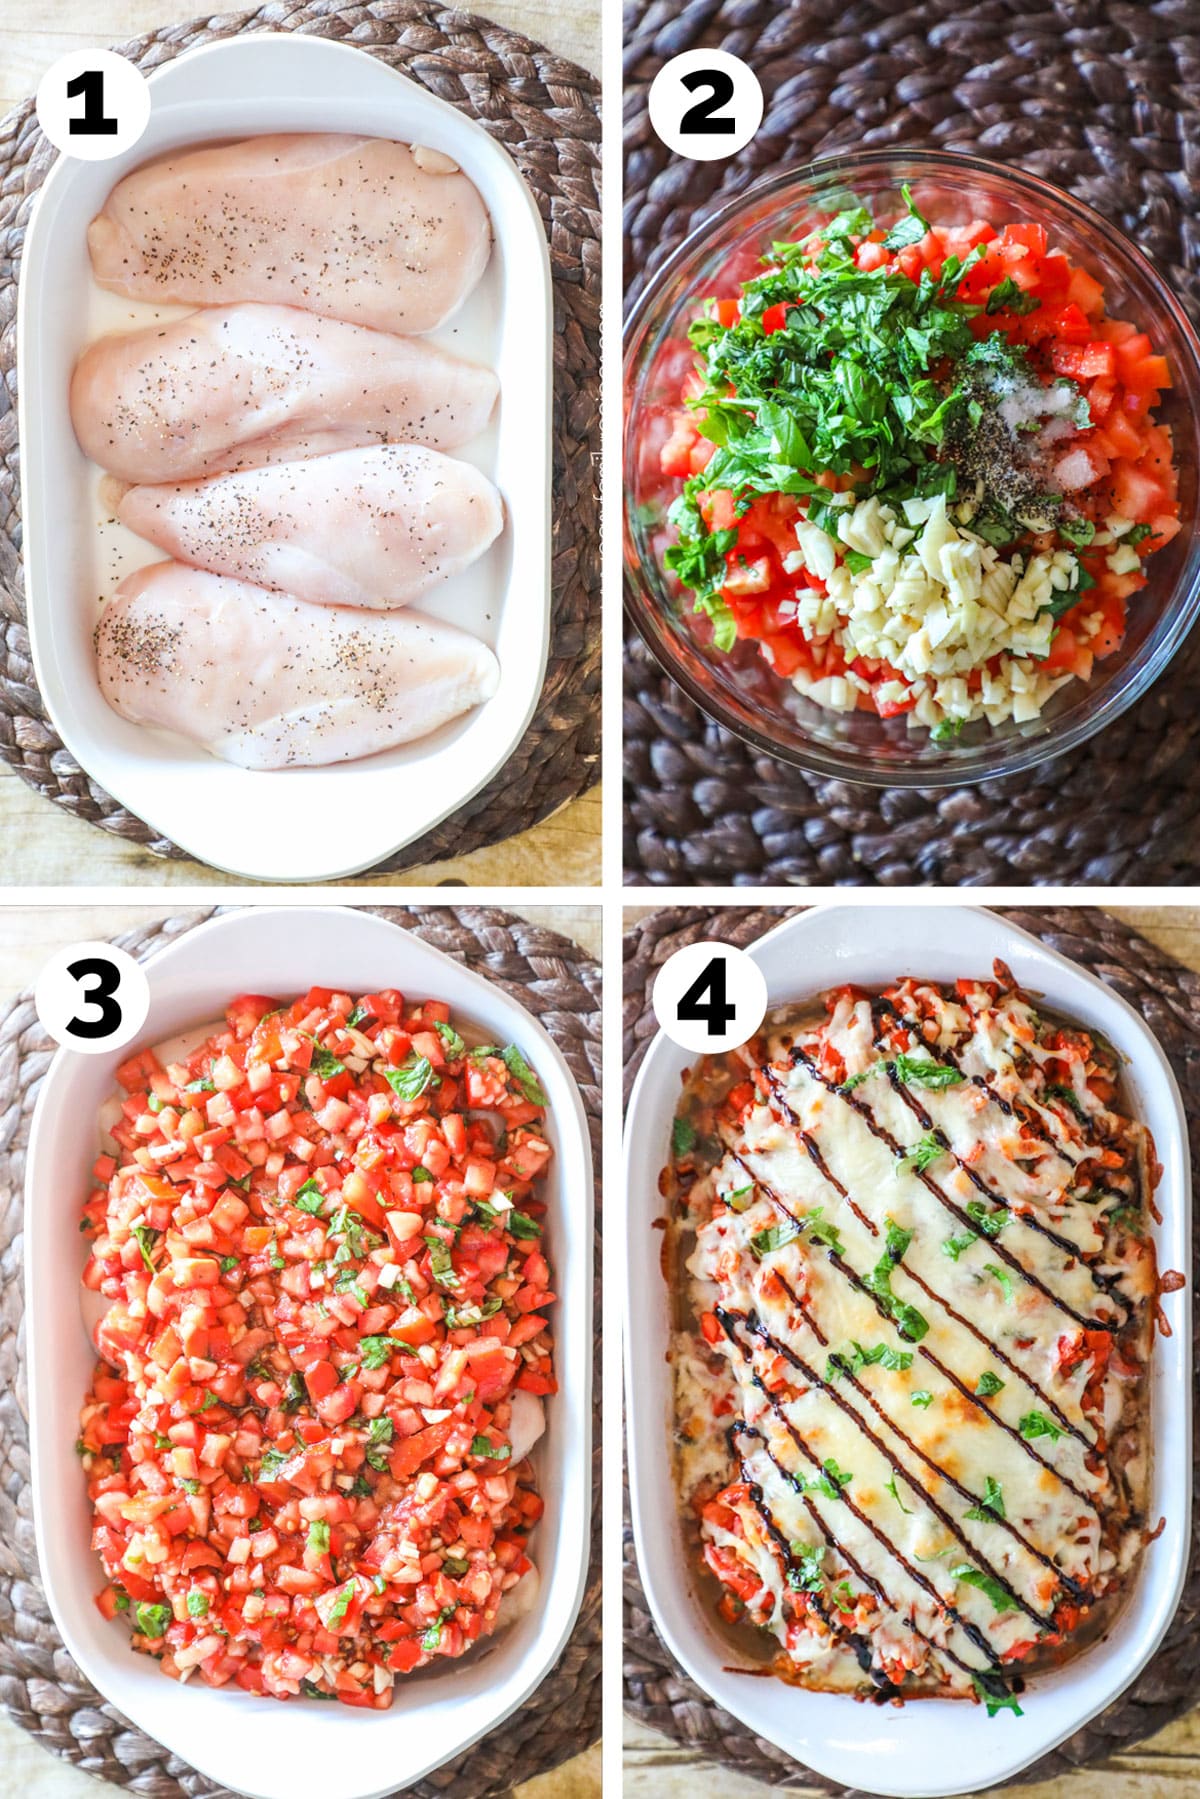 Process photos for how to make baked bruschetta chicken- 1. Place chicken breast in a casserole dish and season, 2. Mix bruschetta topping. 3. cover chicken in bruschetta tomato mixture. 4. top with cheese and bake